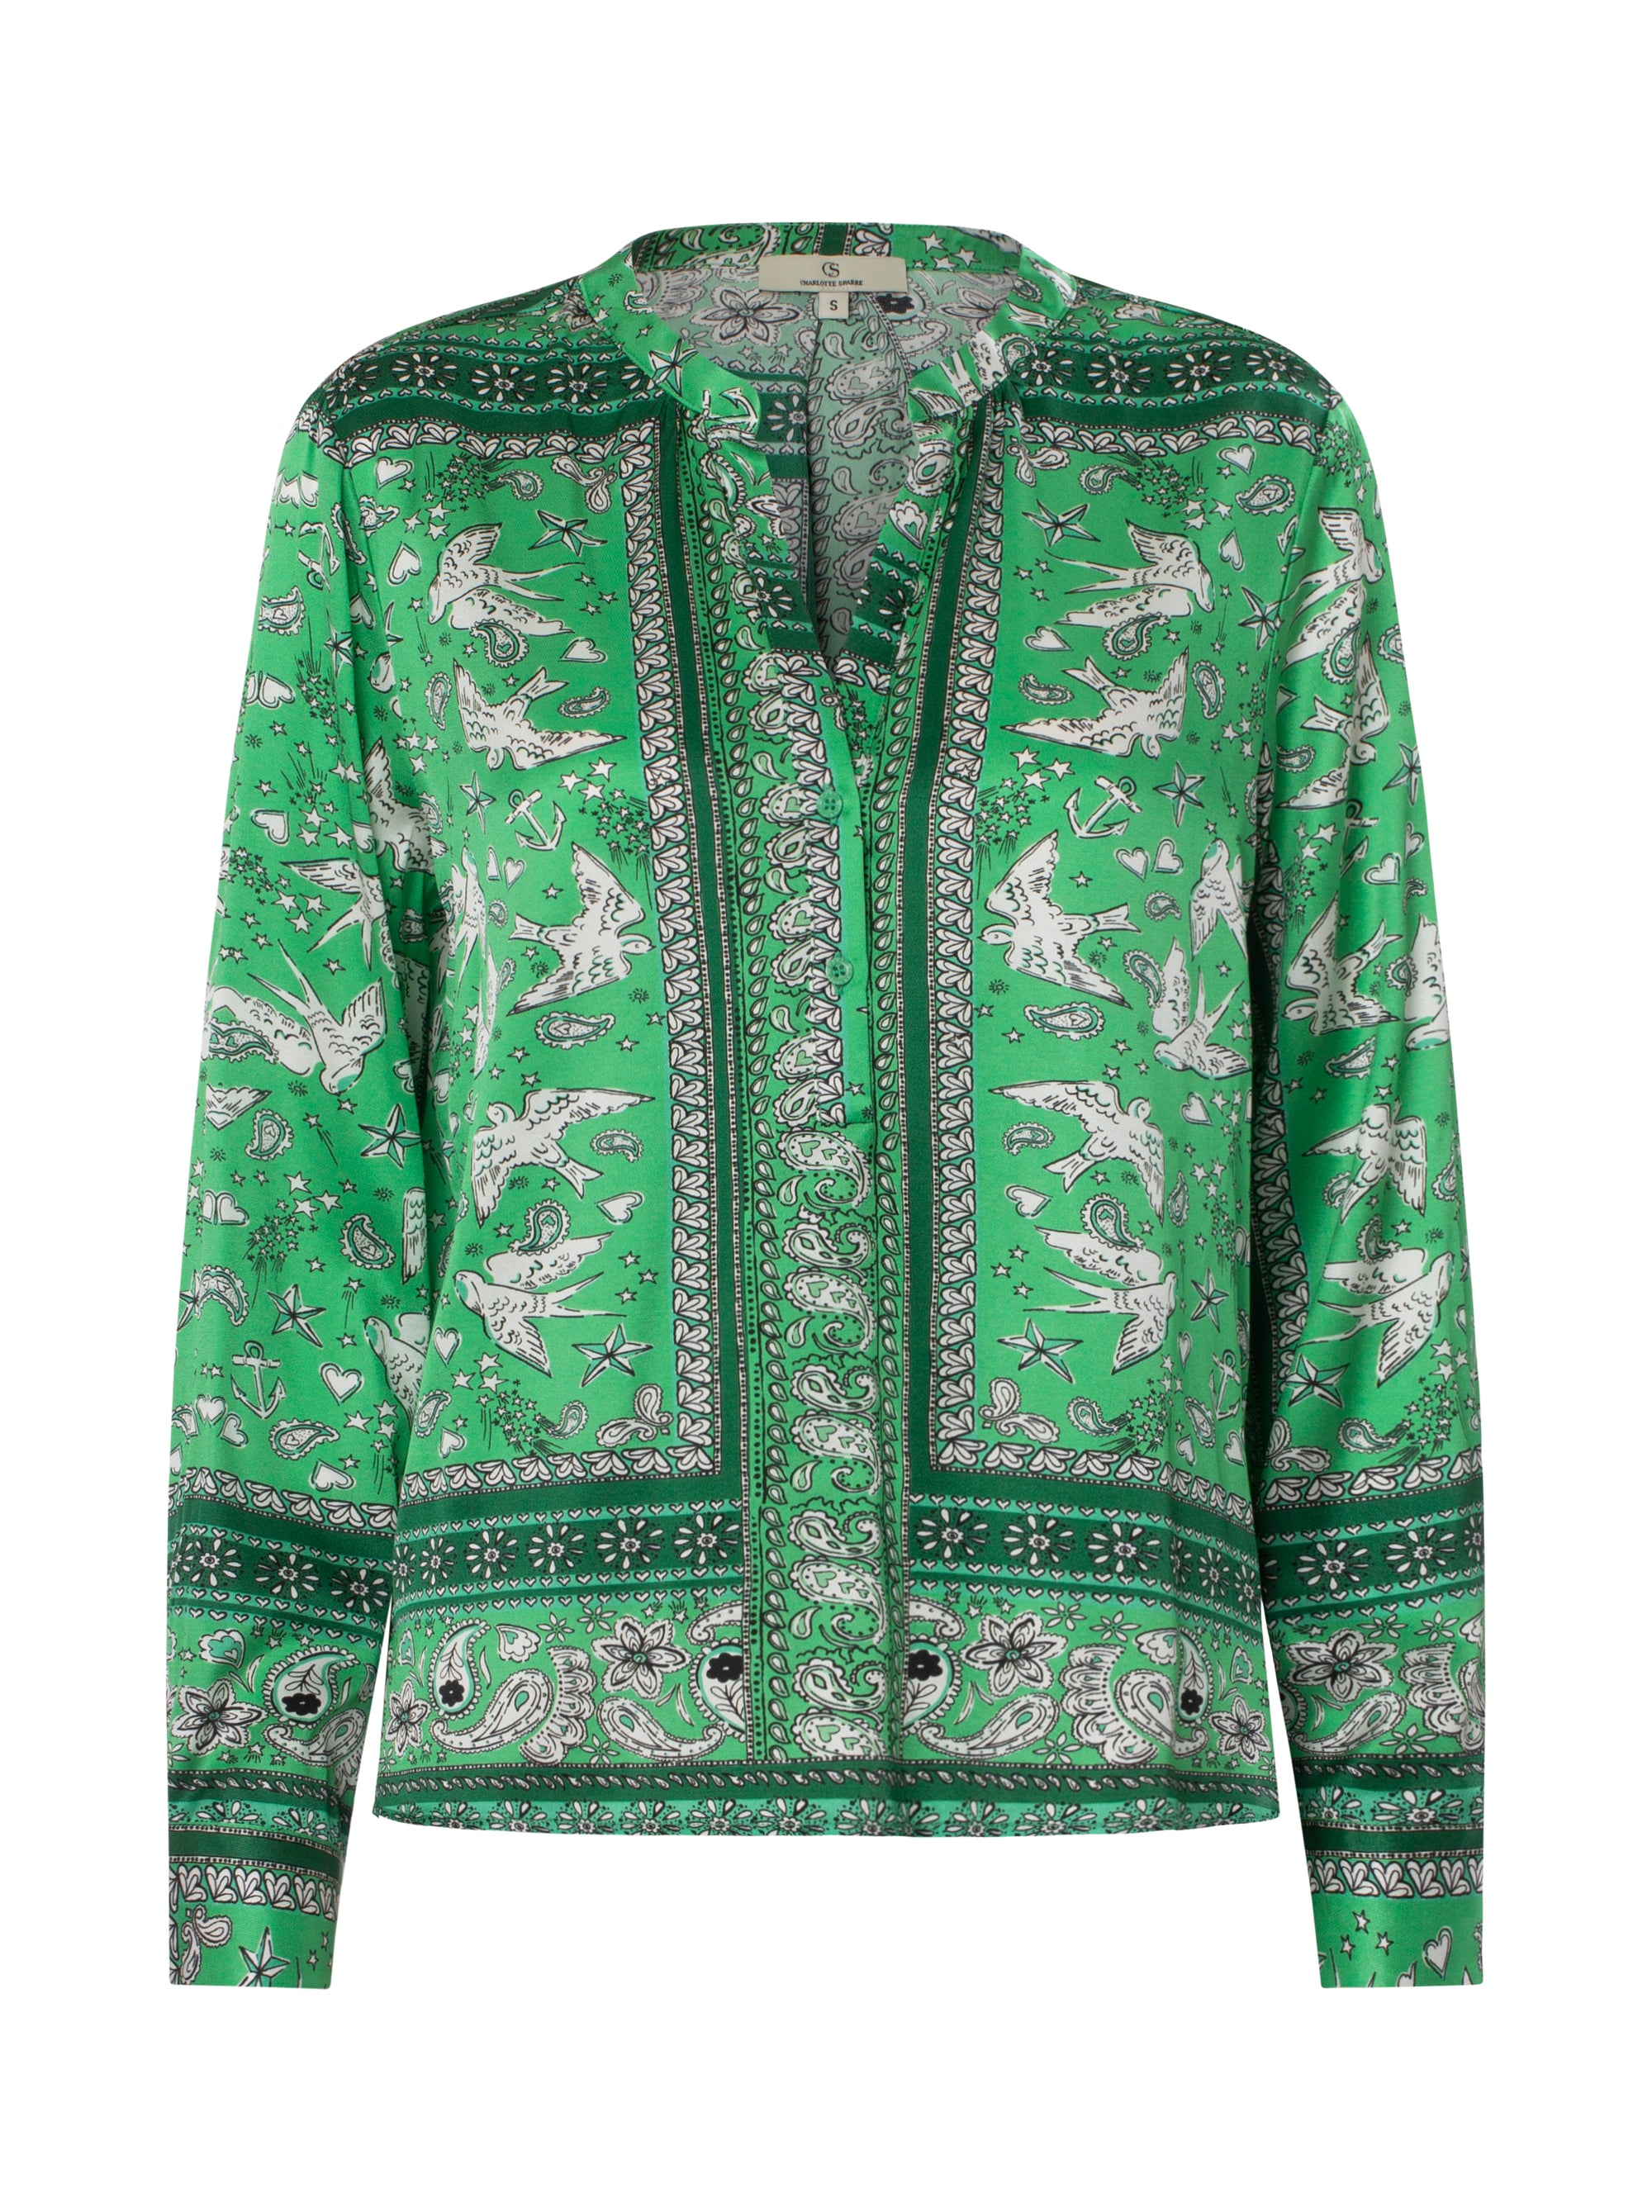 Charlotte Sparre Si Shirt, Dover Green